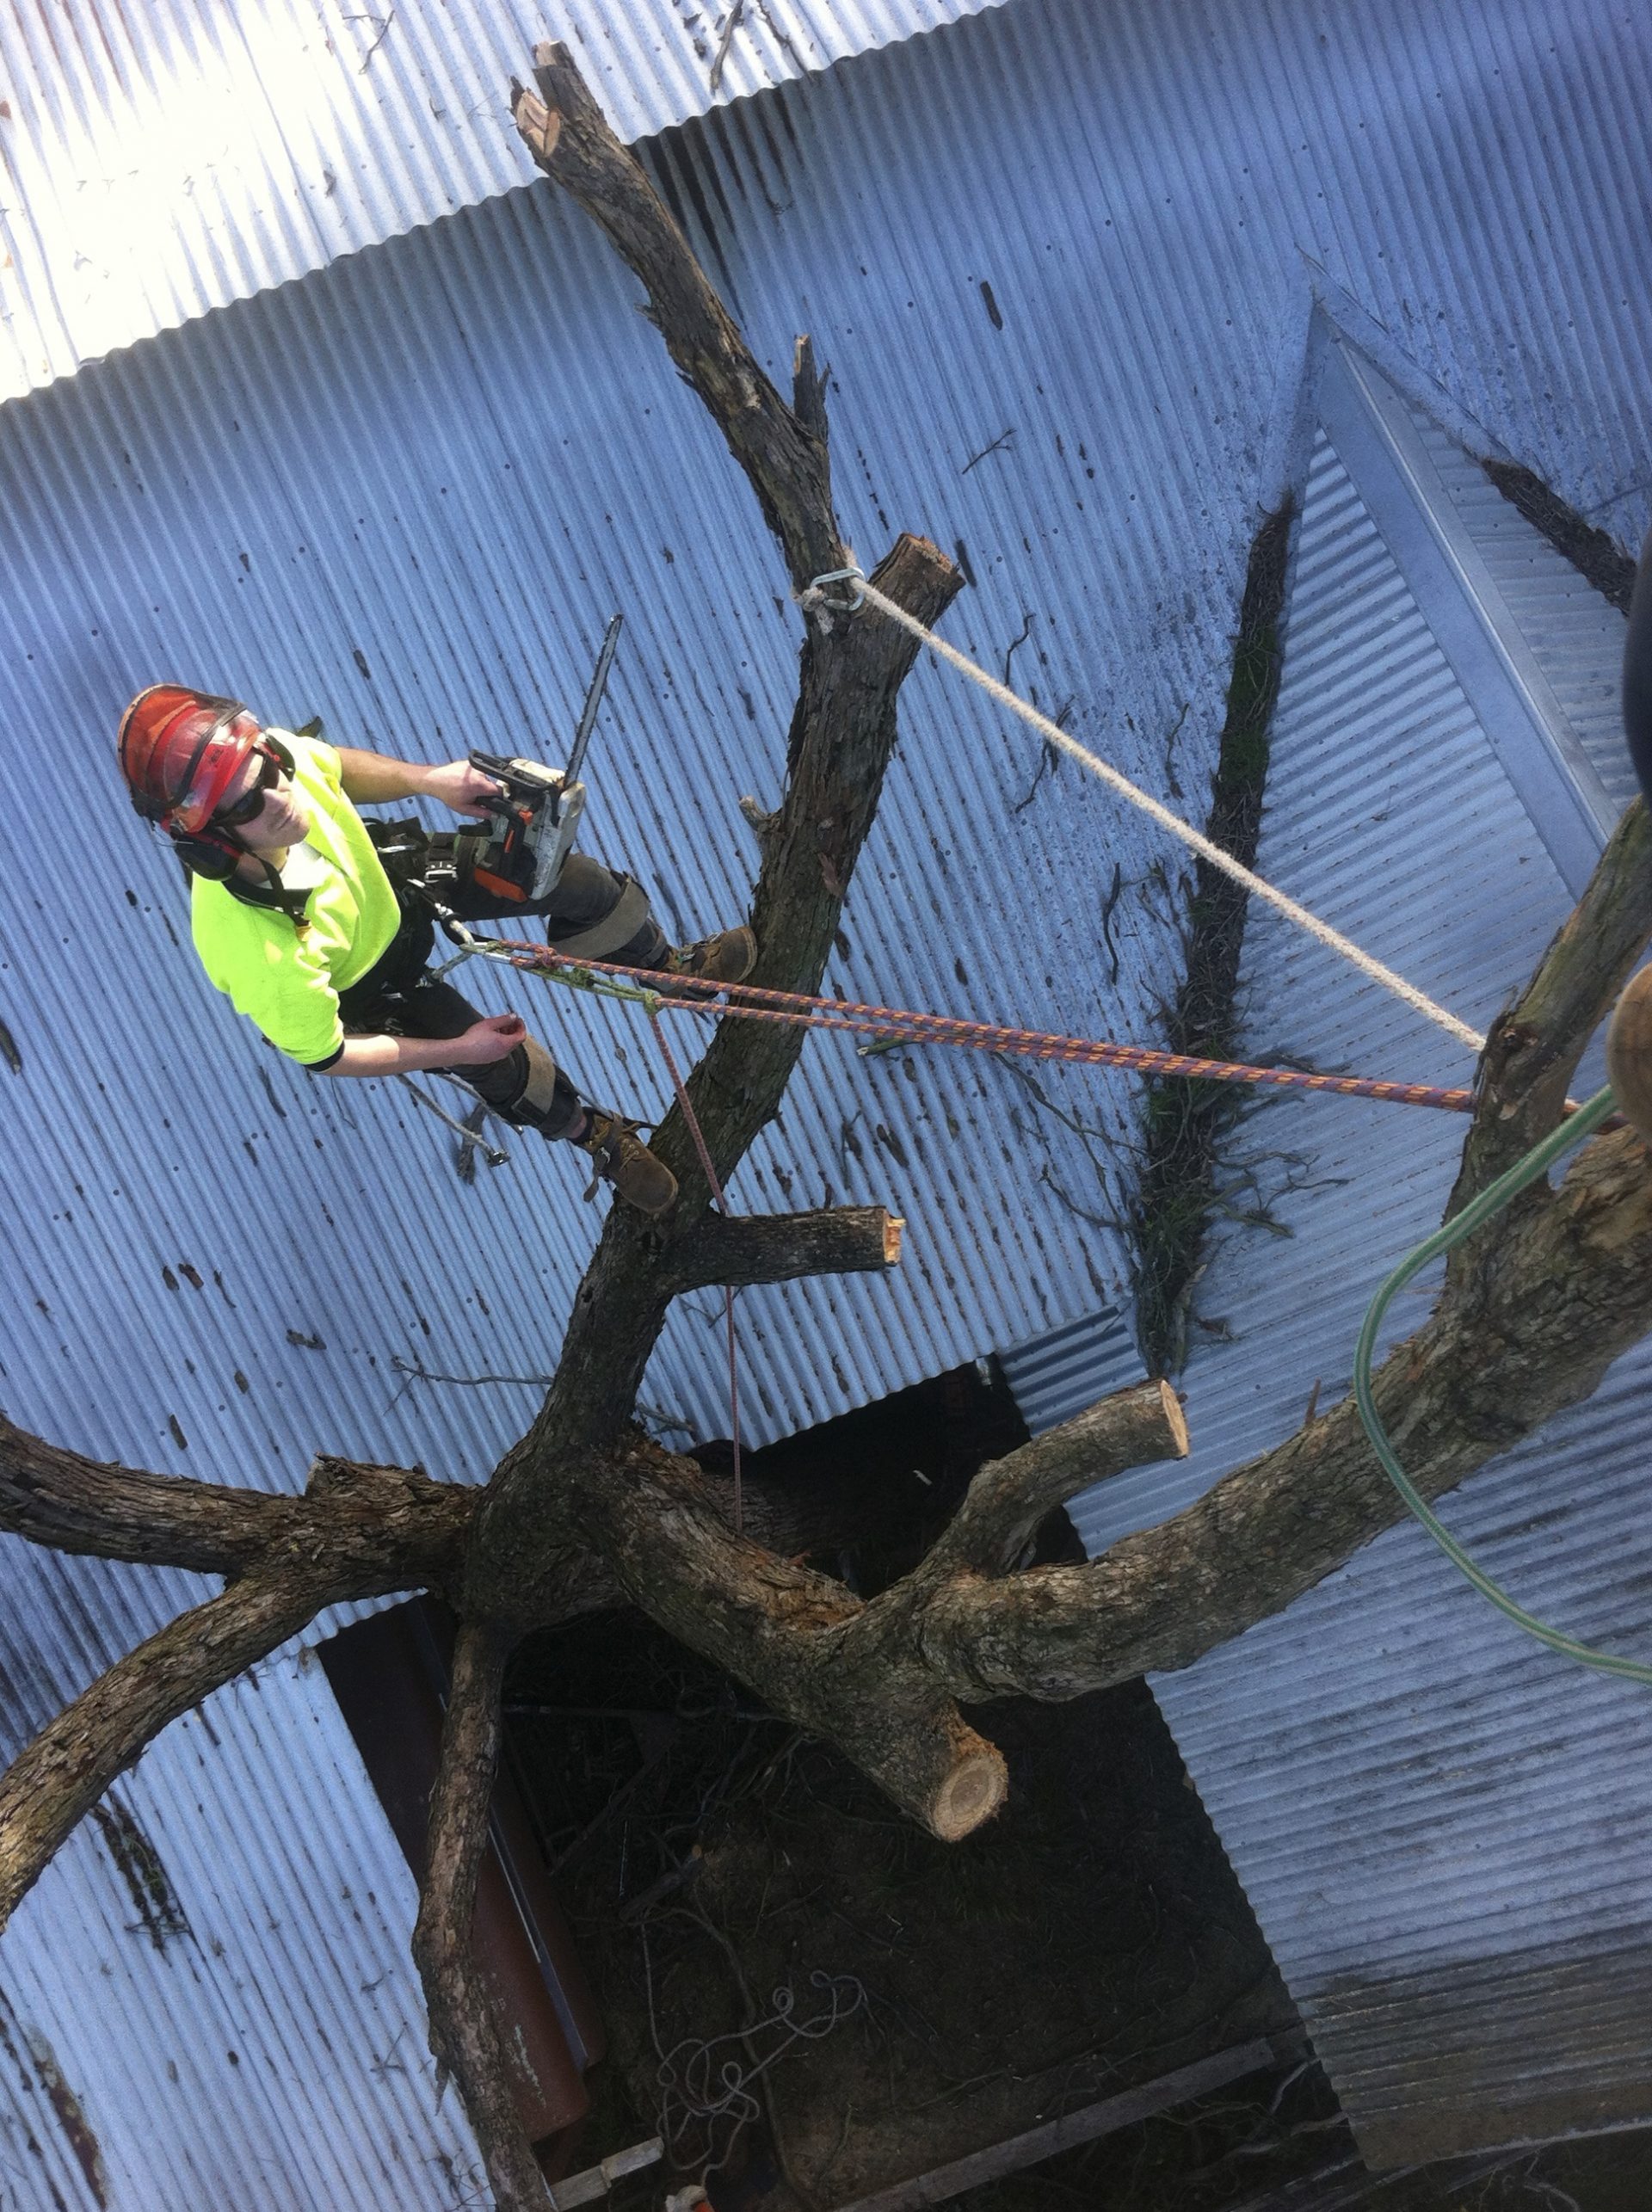 Frankston South's Tree Trimming Experts - Cut It Right Tree Services